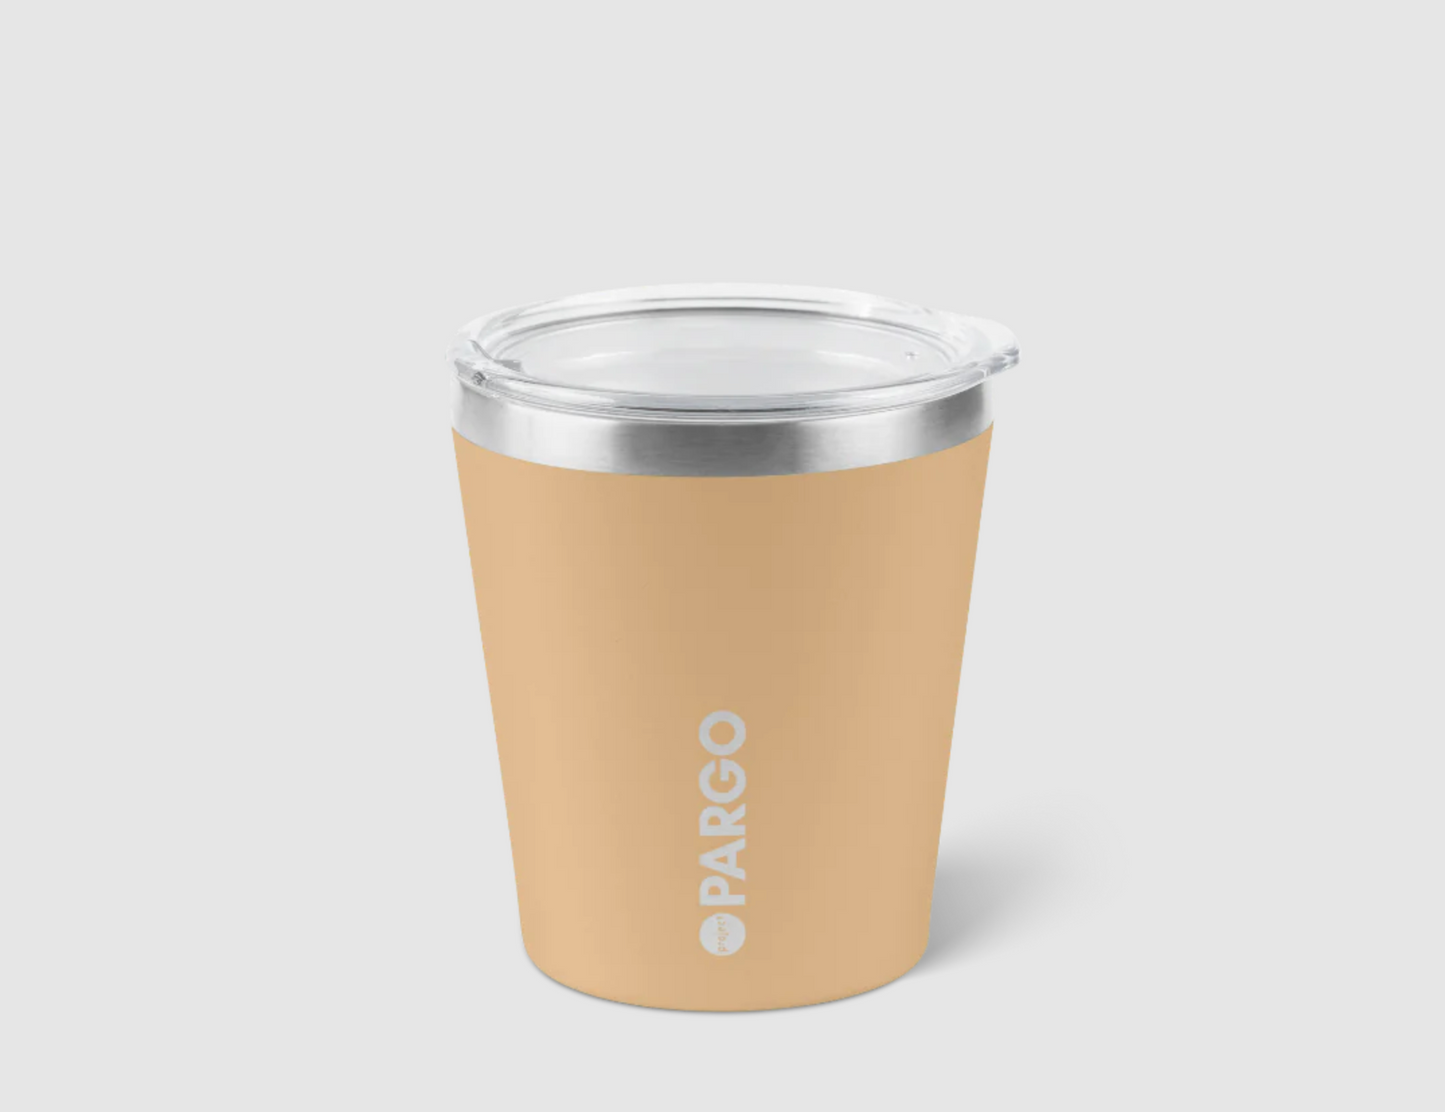 Project Pargo Insulated Coffee Cup 8oz